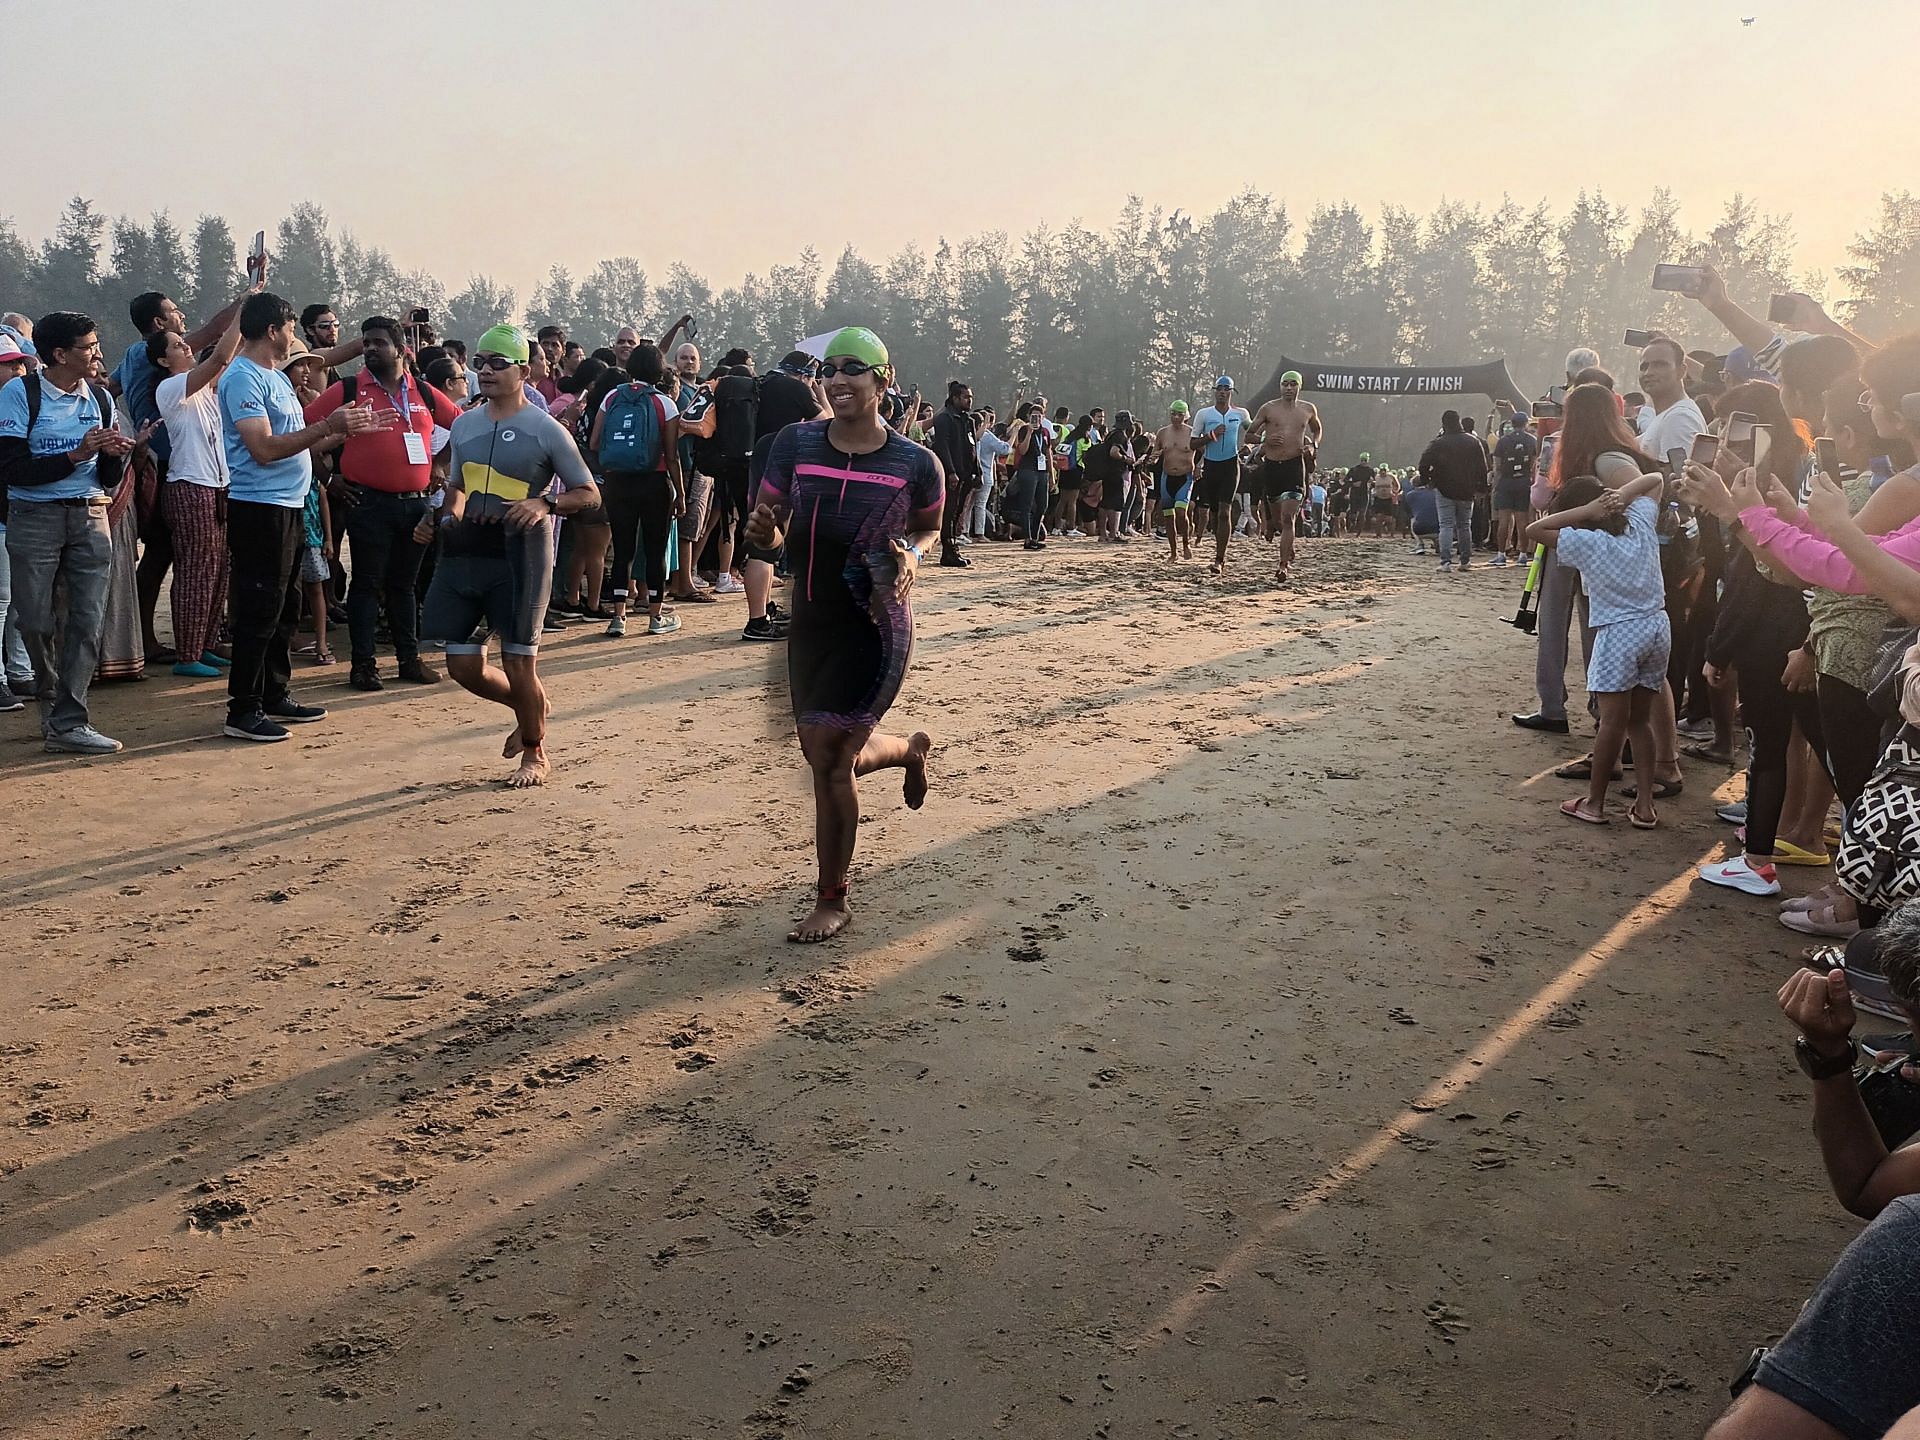 Competitors during Ironman event in Goa on Sunday. Photo credit Navneet Singh